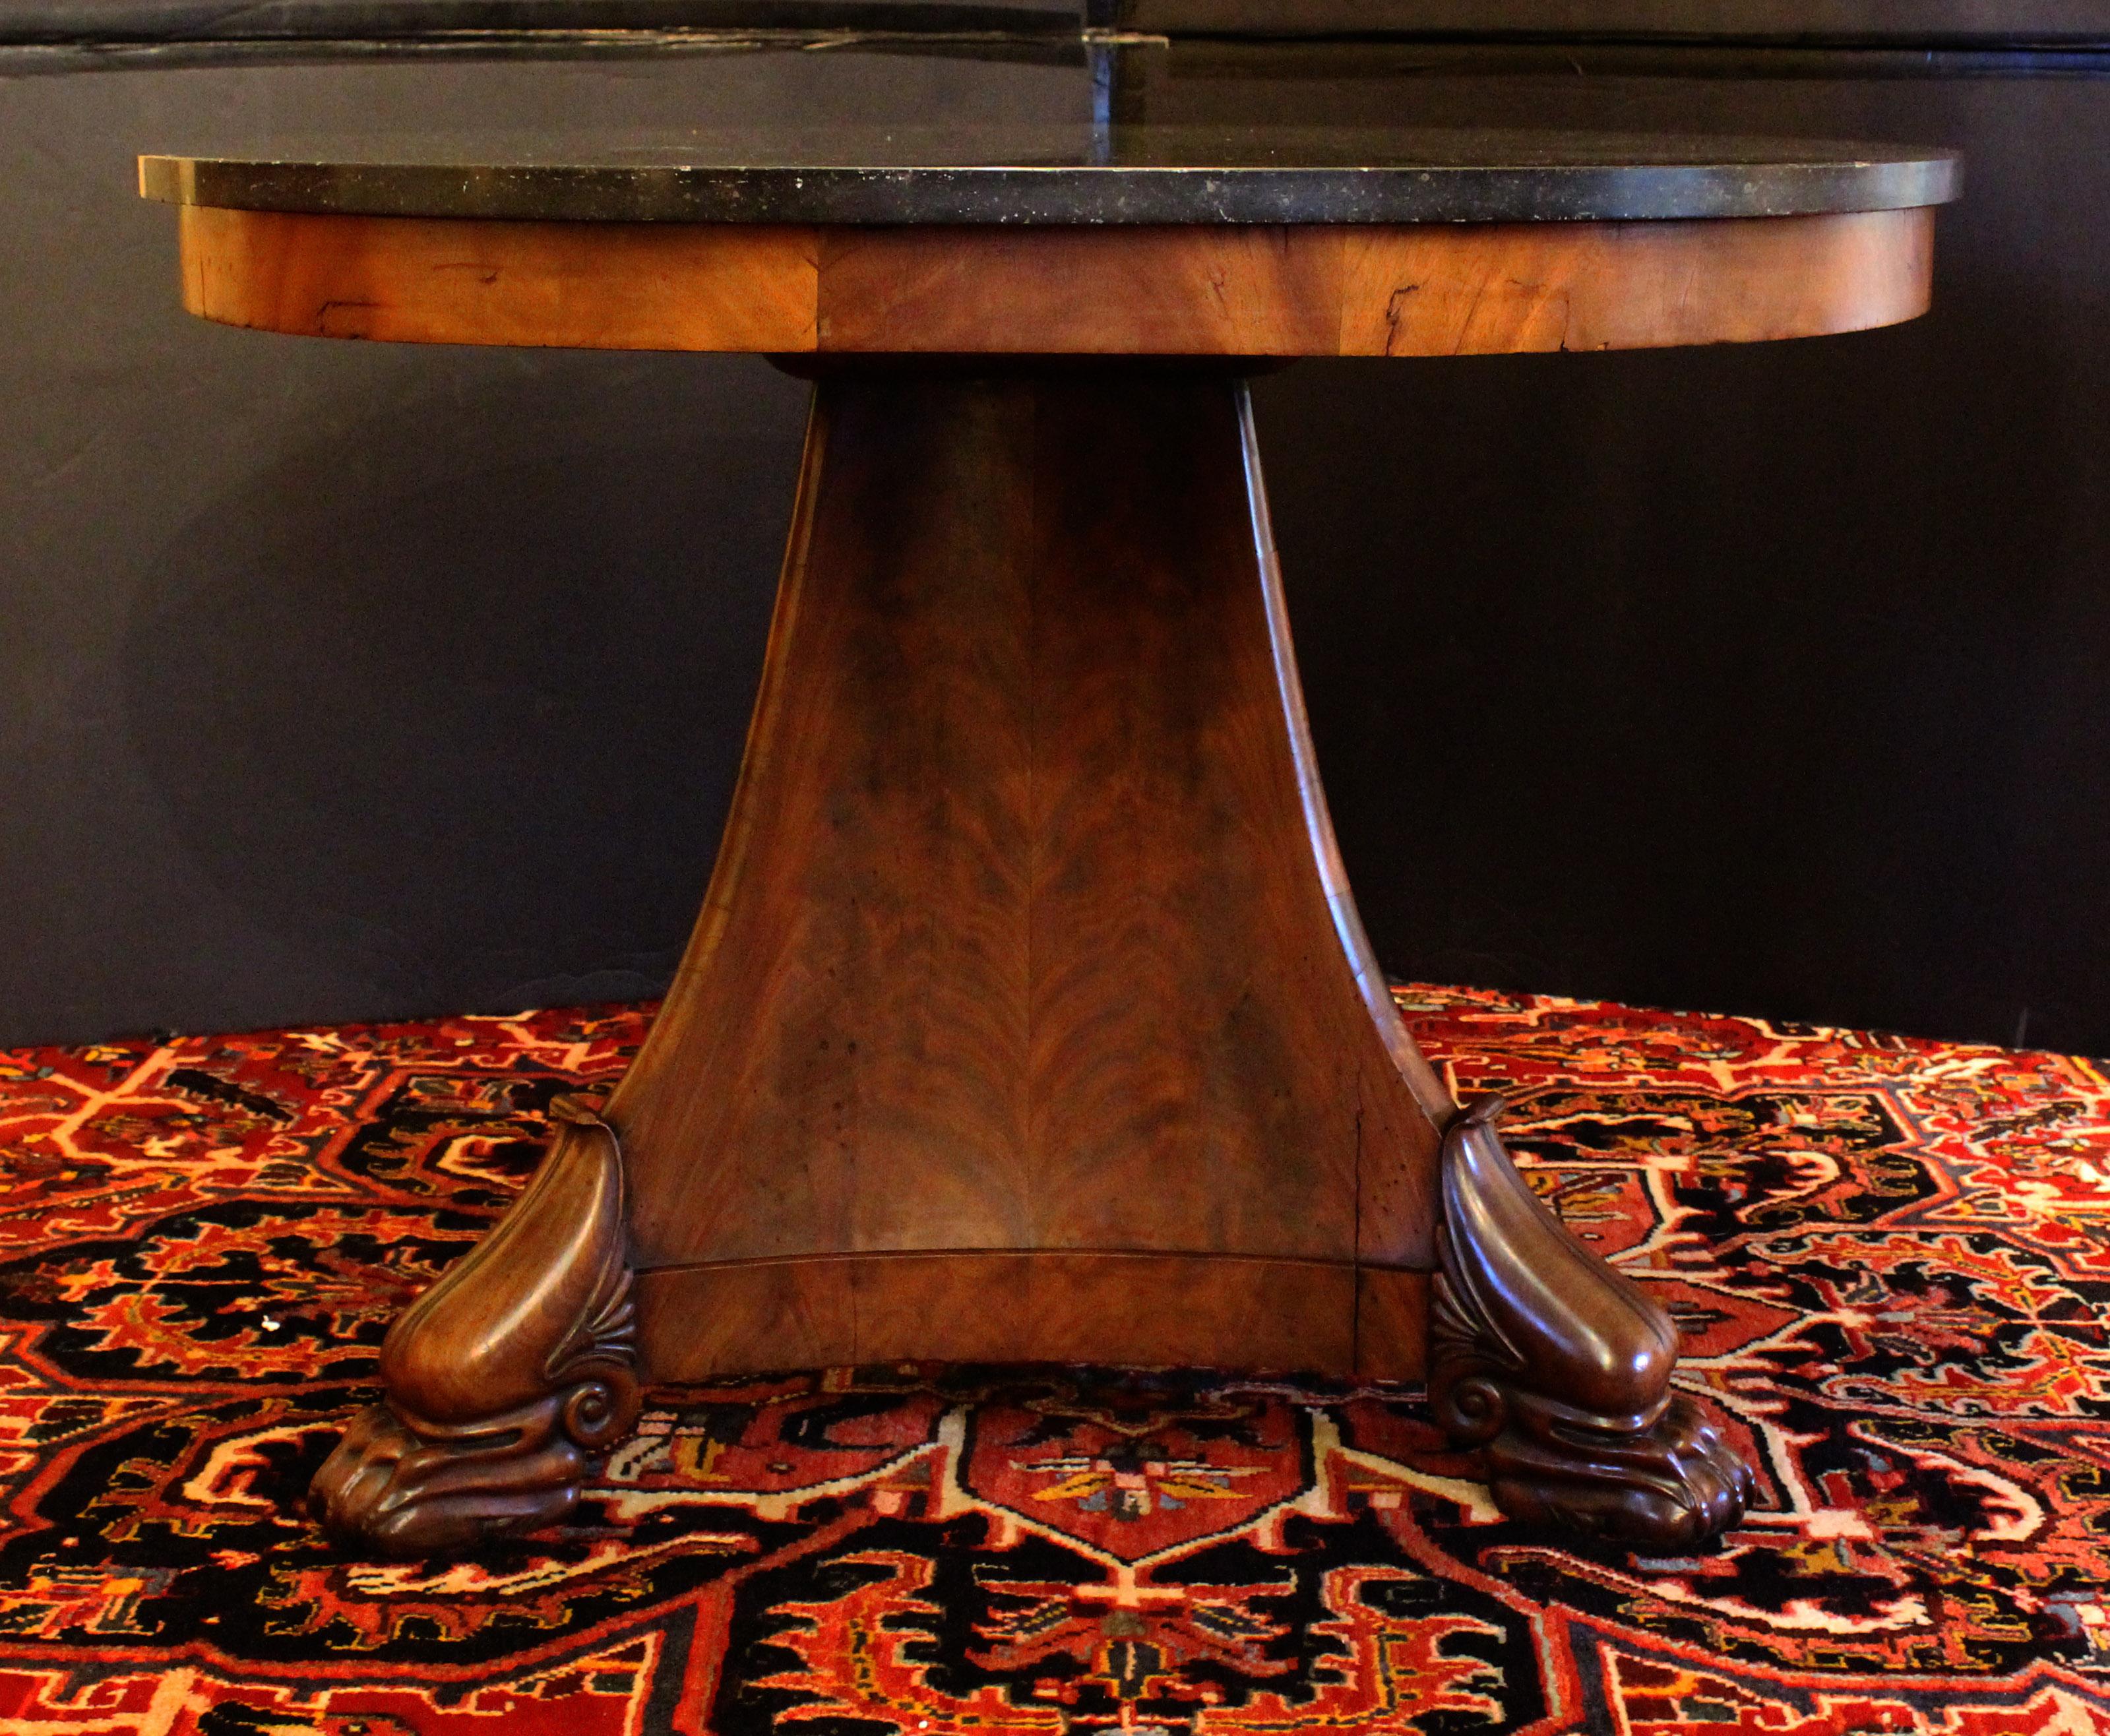 Early 19th century marble top gueridon center table, French. Mahogany, the sides of well figured flame mahogany. Graceful triangular sloped, concave side base ending in three well developed lapet, fan scrolling & paw feet. Old burn mark near base of